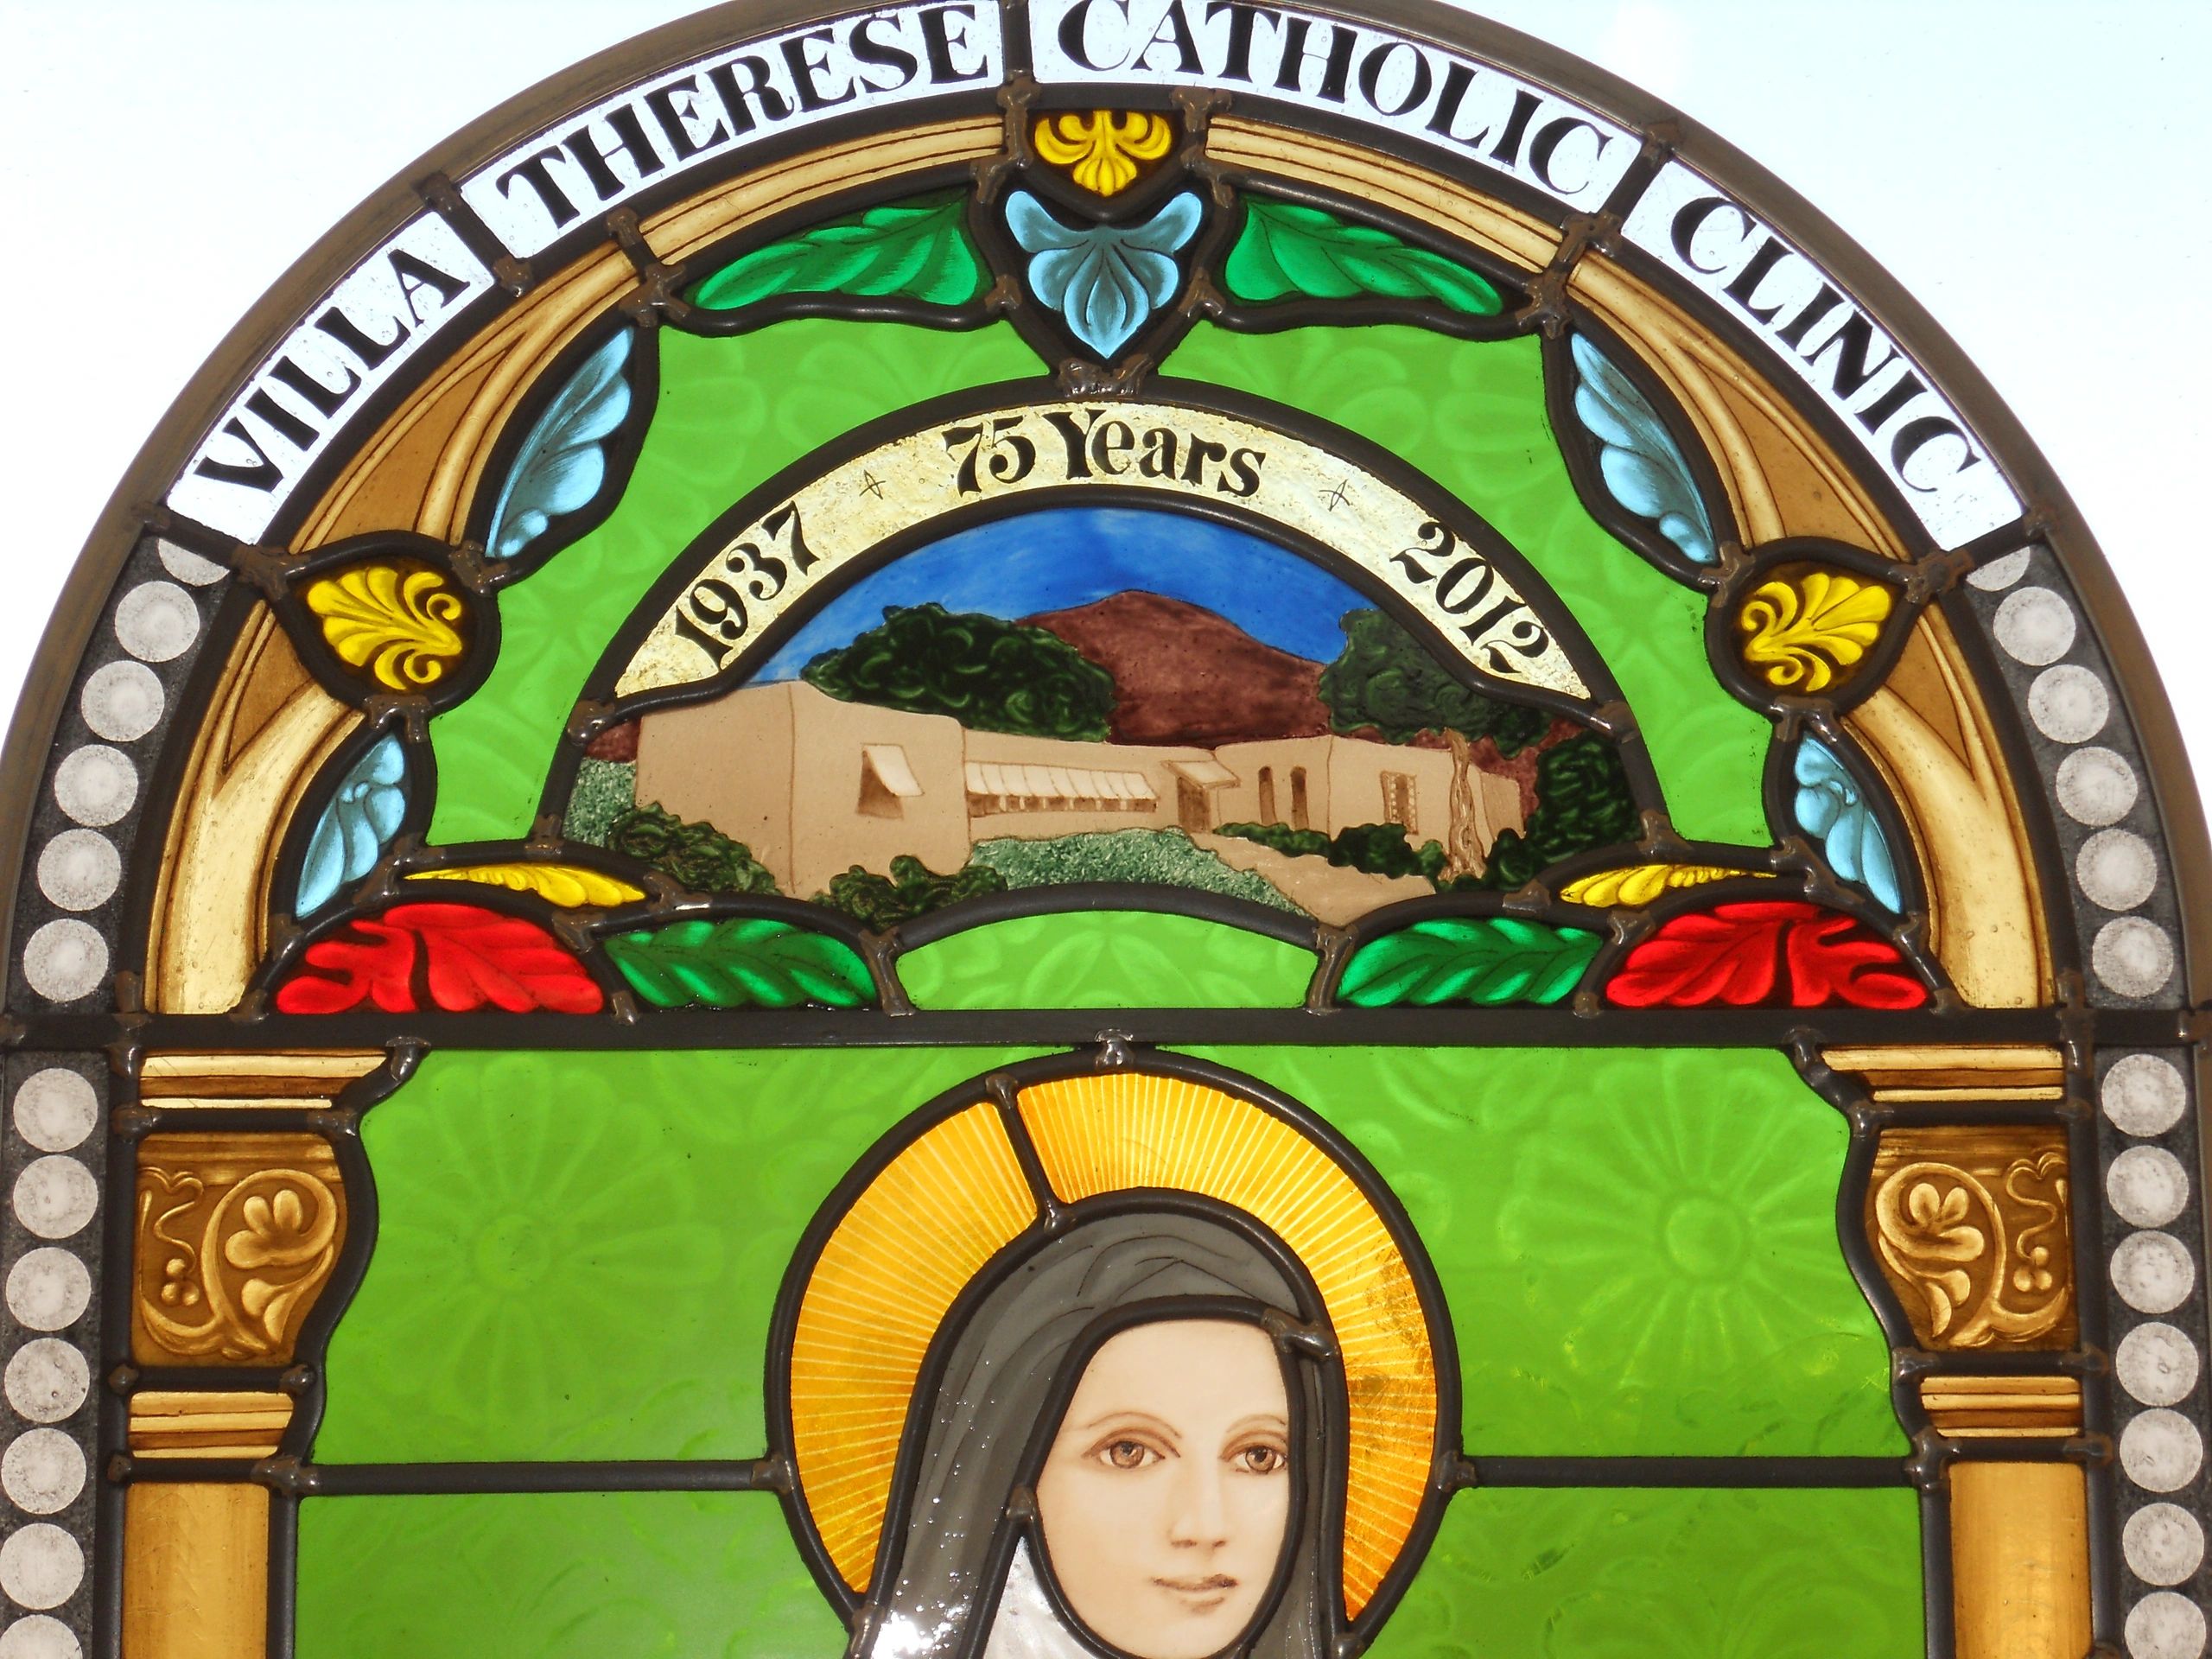 St. Therese , painted stained glass, green painted background.